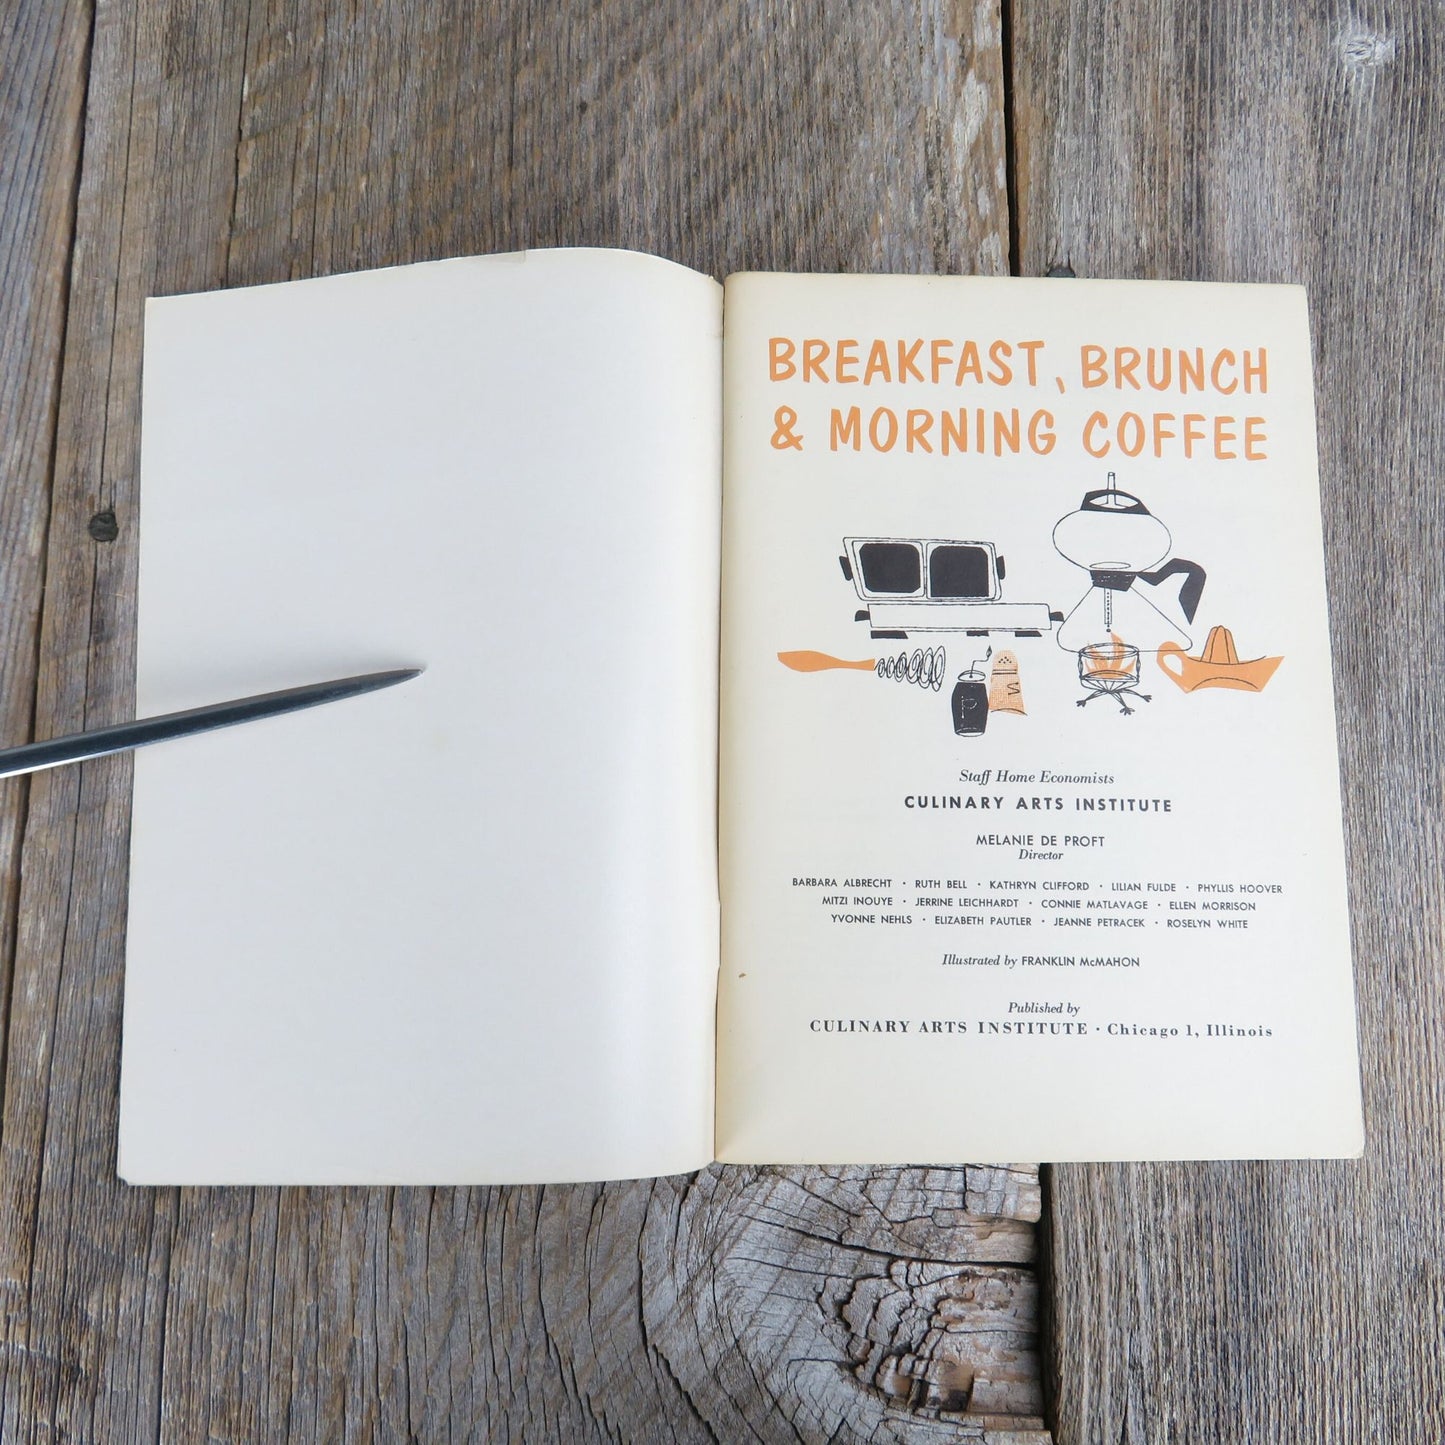 262 Brunch Breakfast Recipes Cookbook Culinary Arts Institute 1955 Vintage Pamphlet Morning Coffee